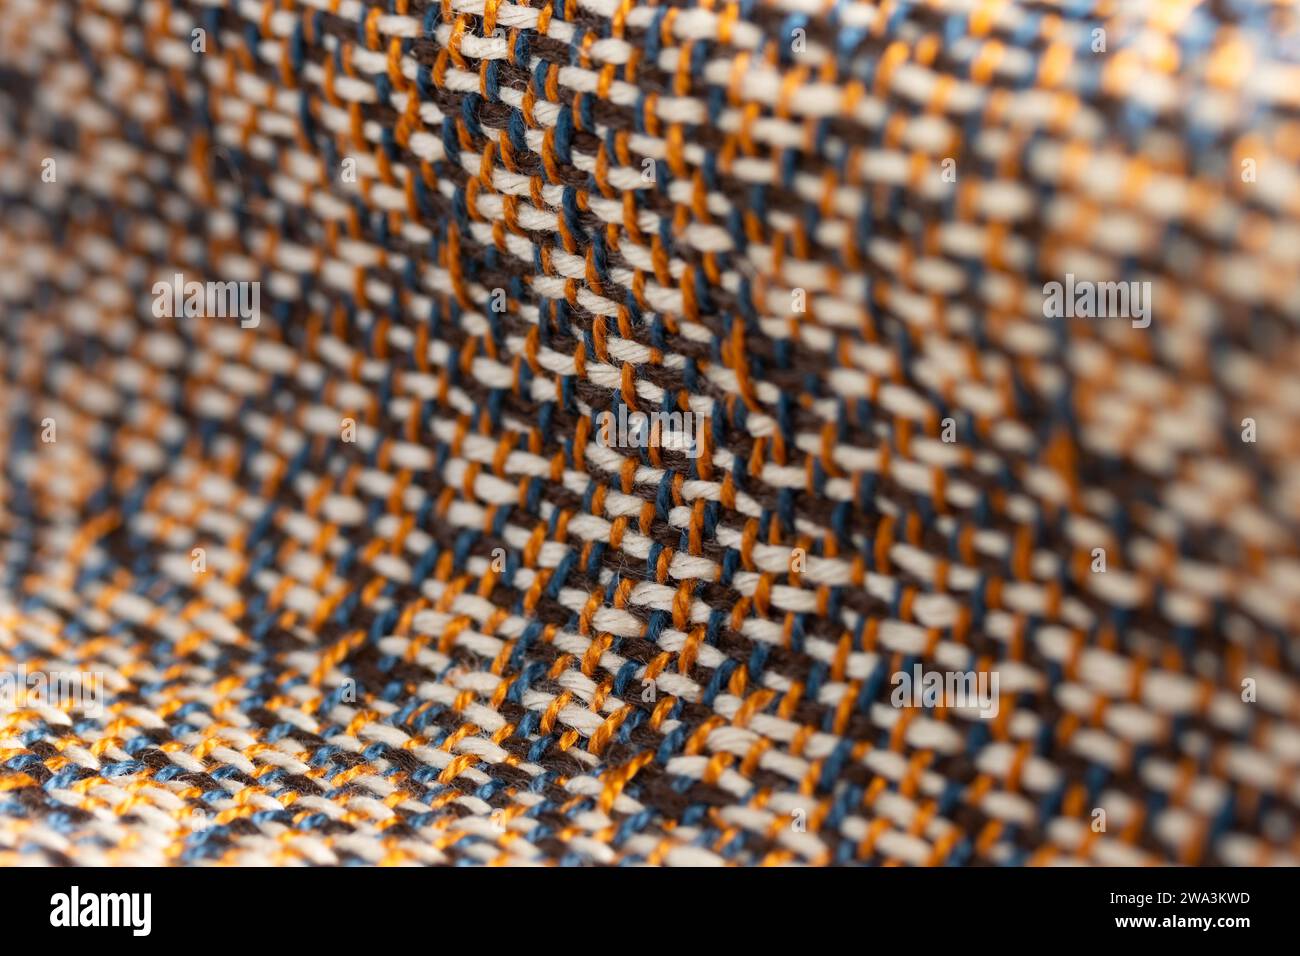 draped, multi-color woven cloth with orange, brown, cream and blue, close up detail macro shot with shallow depth of field Stock Photo